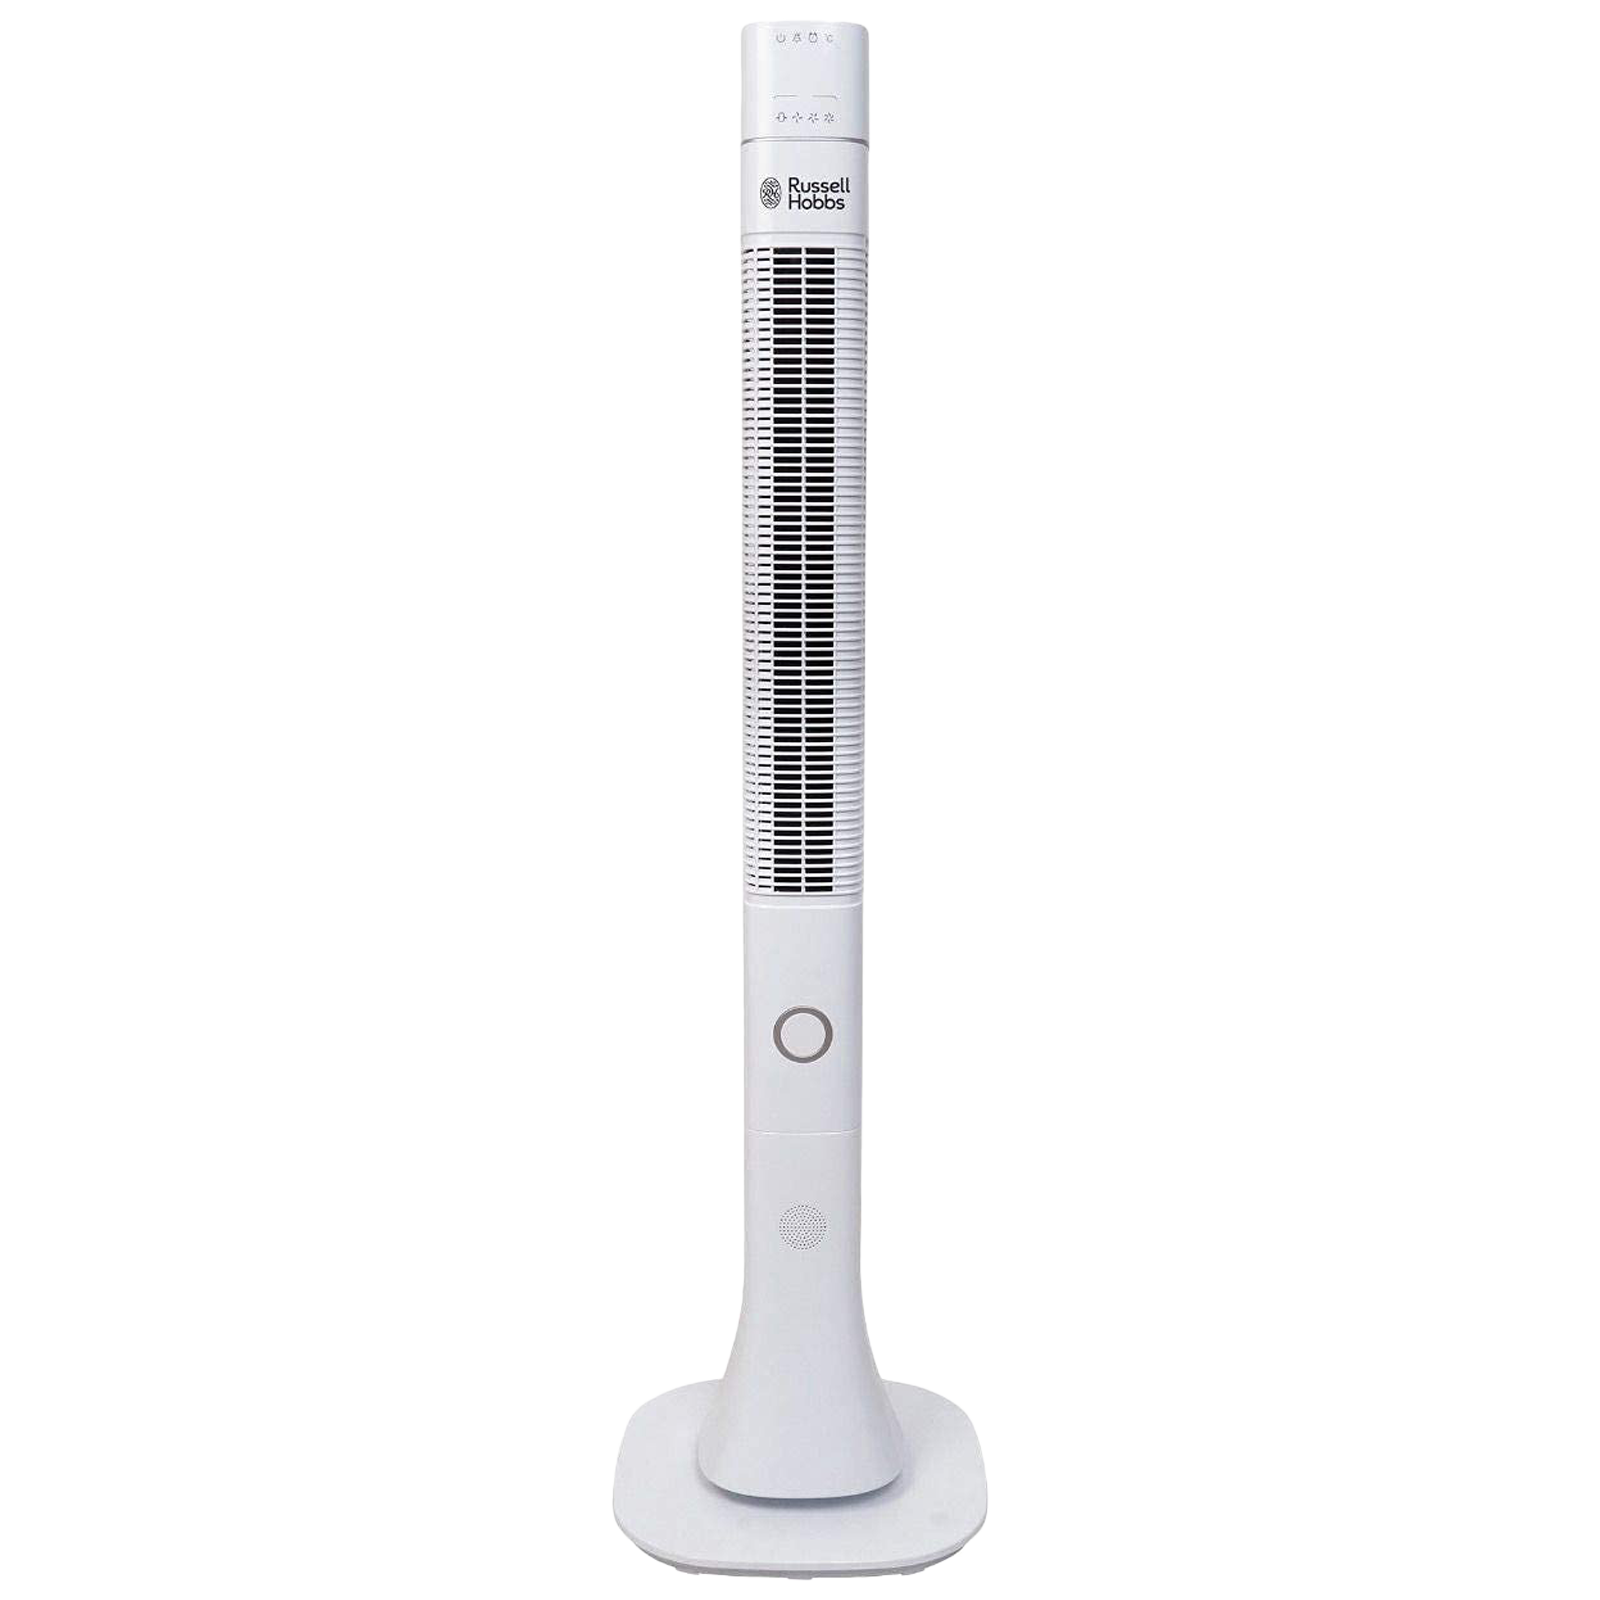 Russell Hobbs RTF-4800 Bladeless 13800 m3/hr Air Delivery Tower Fan with Remote (Superior Quality, White)